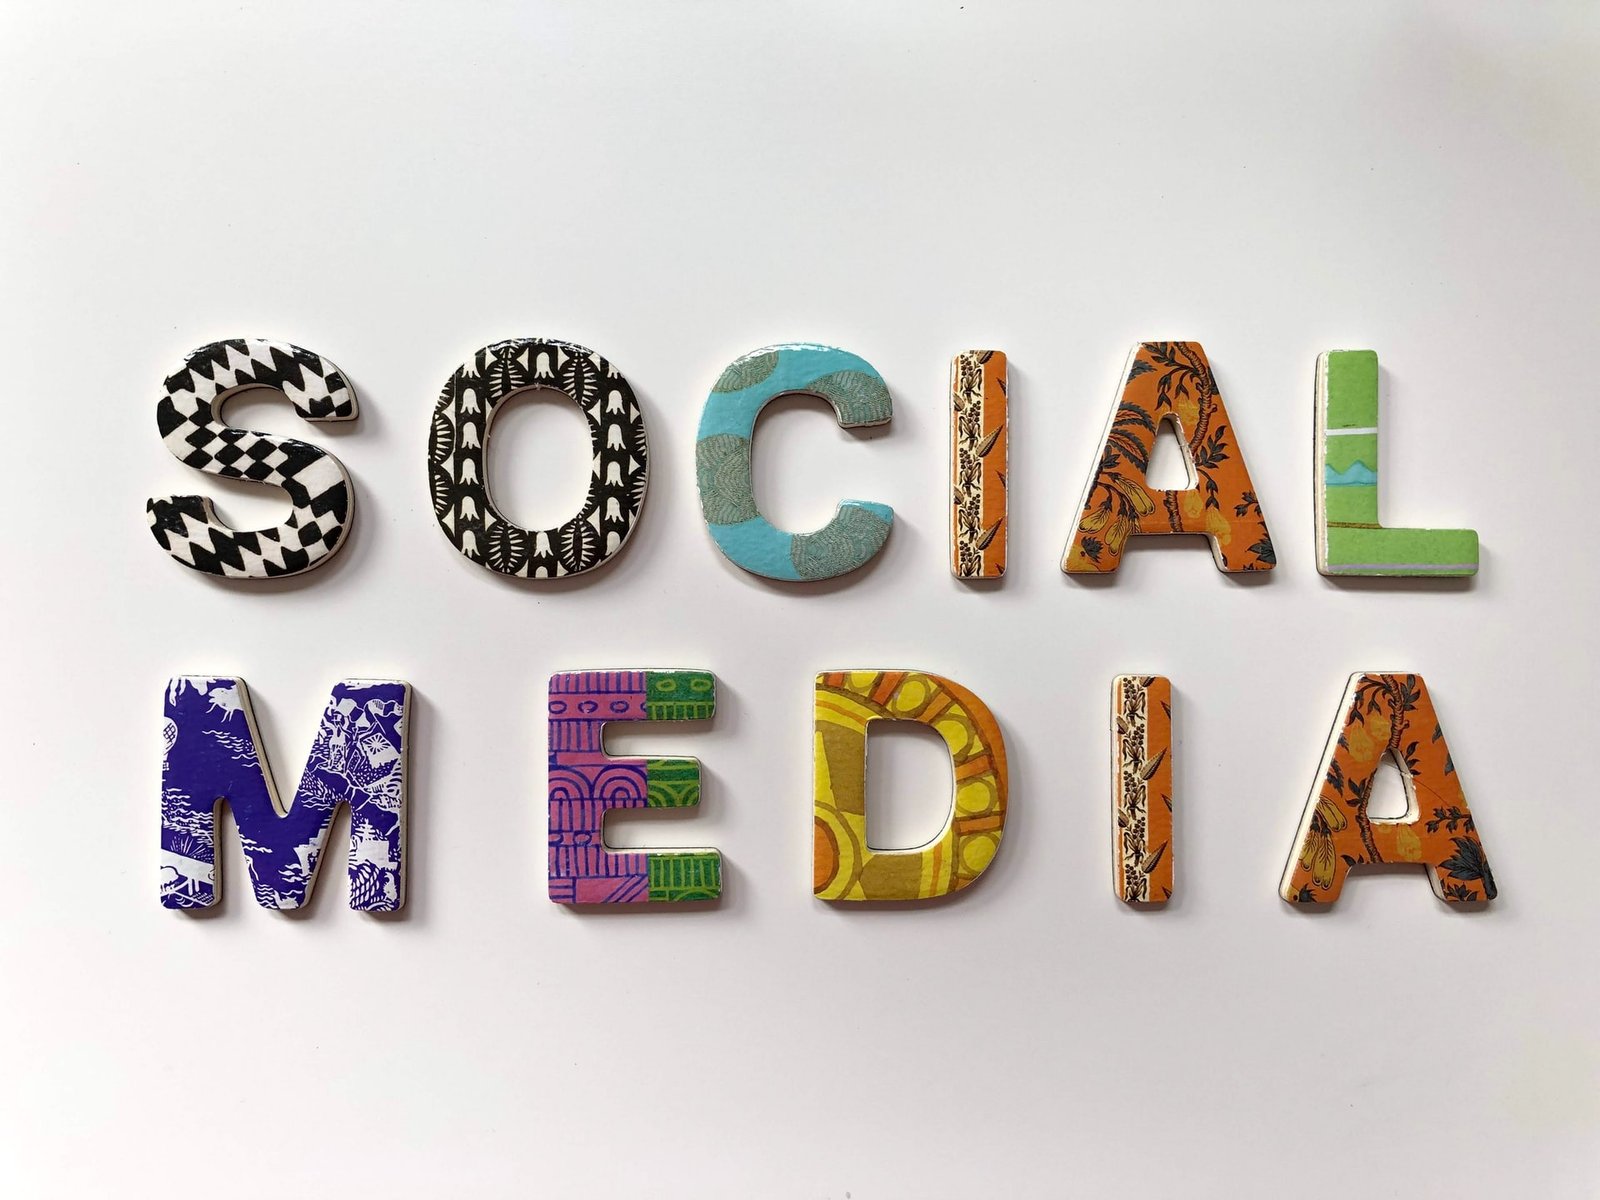 Effective Social Media Marketing For Small Business